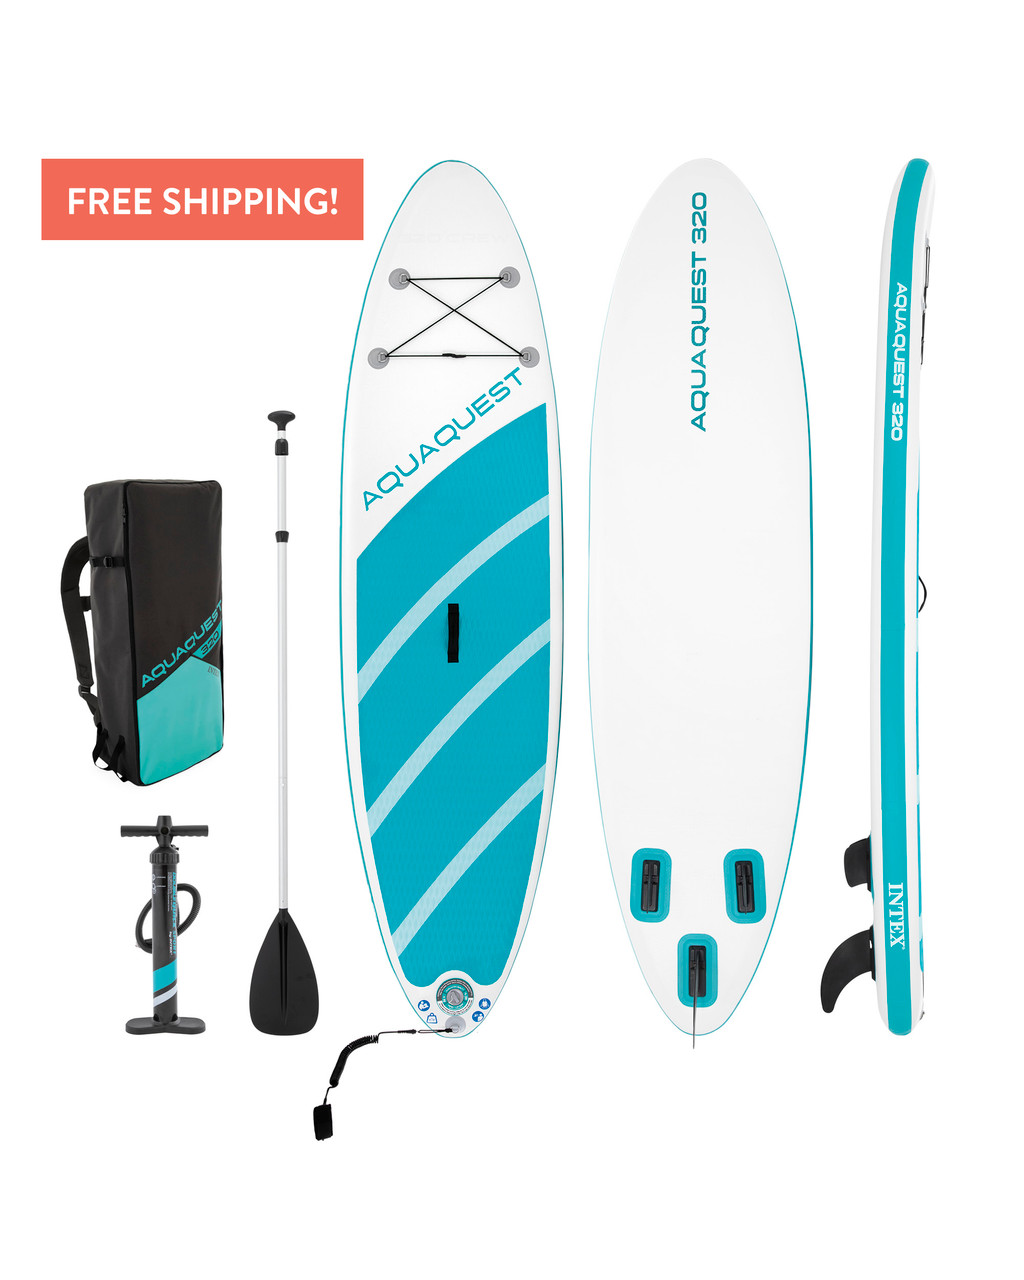 INTEX AquaQuest Inflatable Paddle Board: Model 240 $70 for child; Model 320 $90 for adults at Woot